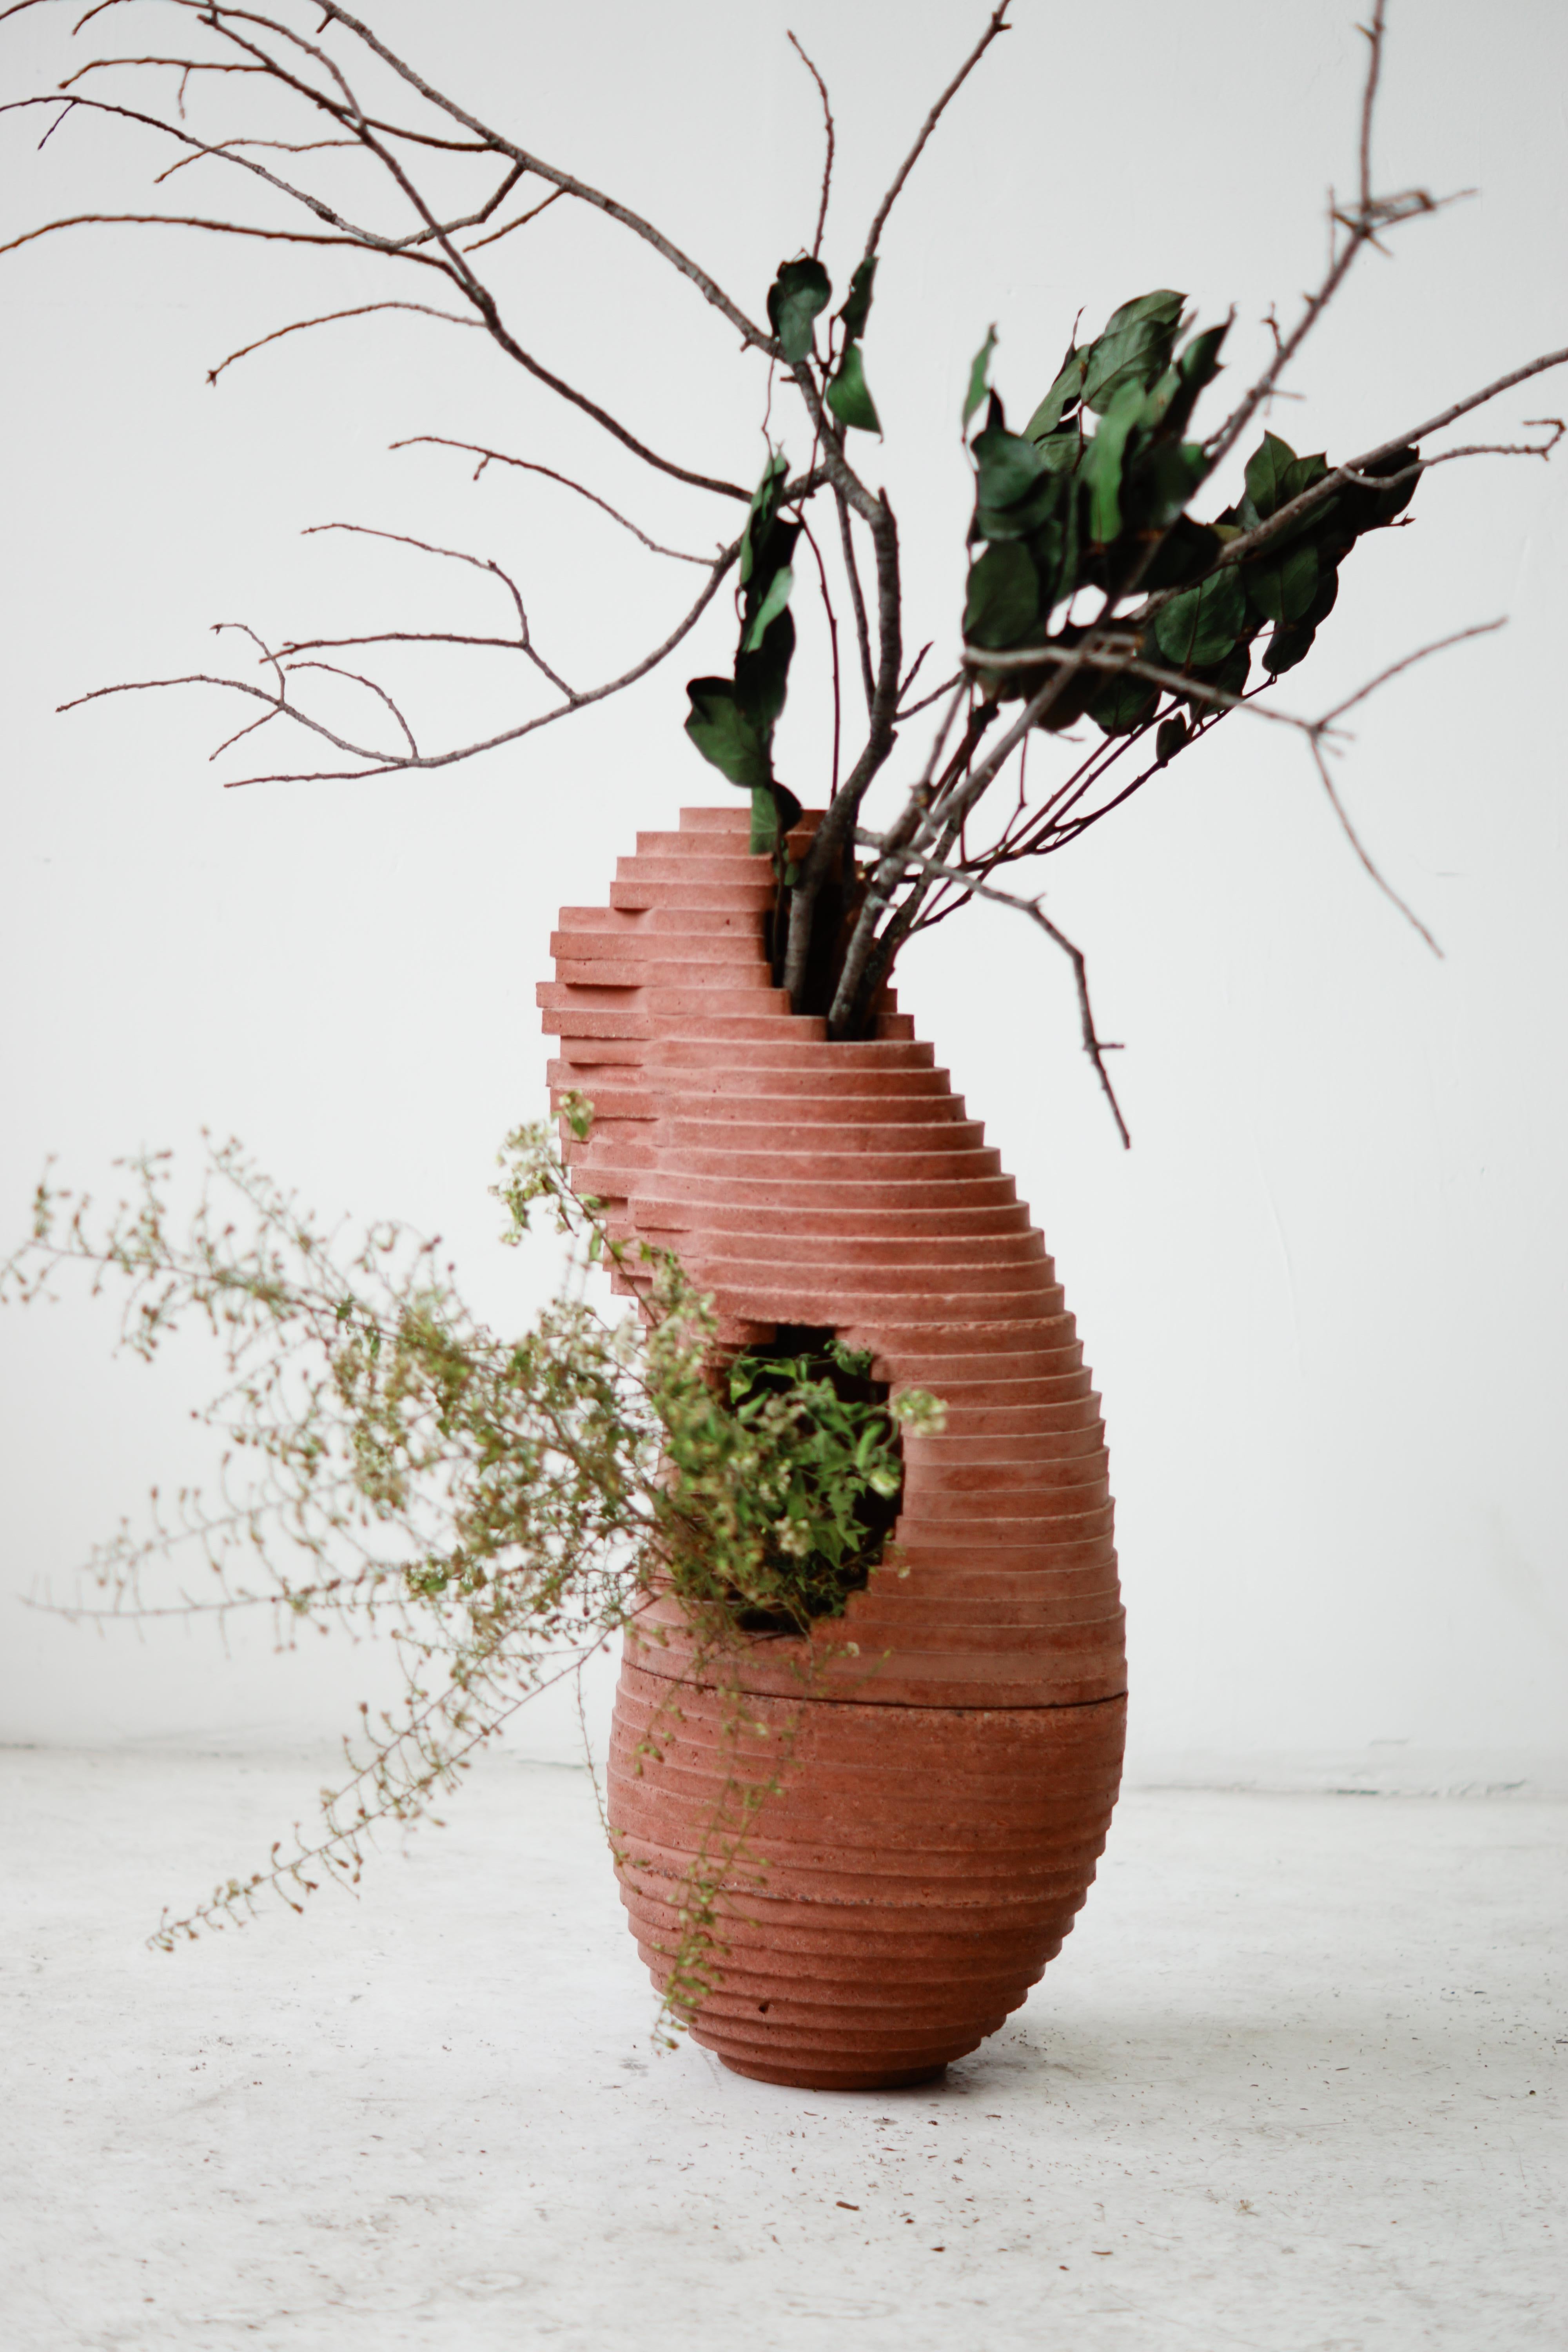 Large Ikebana-style, hand-cast vessel in two parts for indoor and outdoor use.

At the intersection of art, craft, and design, Concrete Poetics' debut collection of hand-cast cement sculptural furniture and accessories streamlines visually